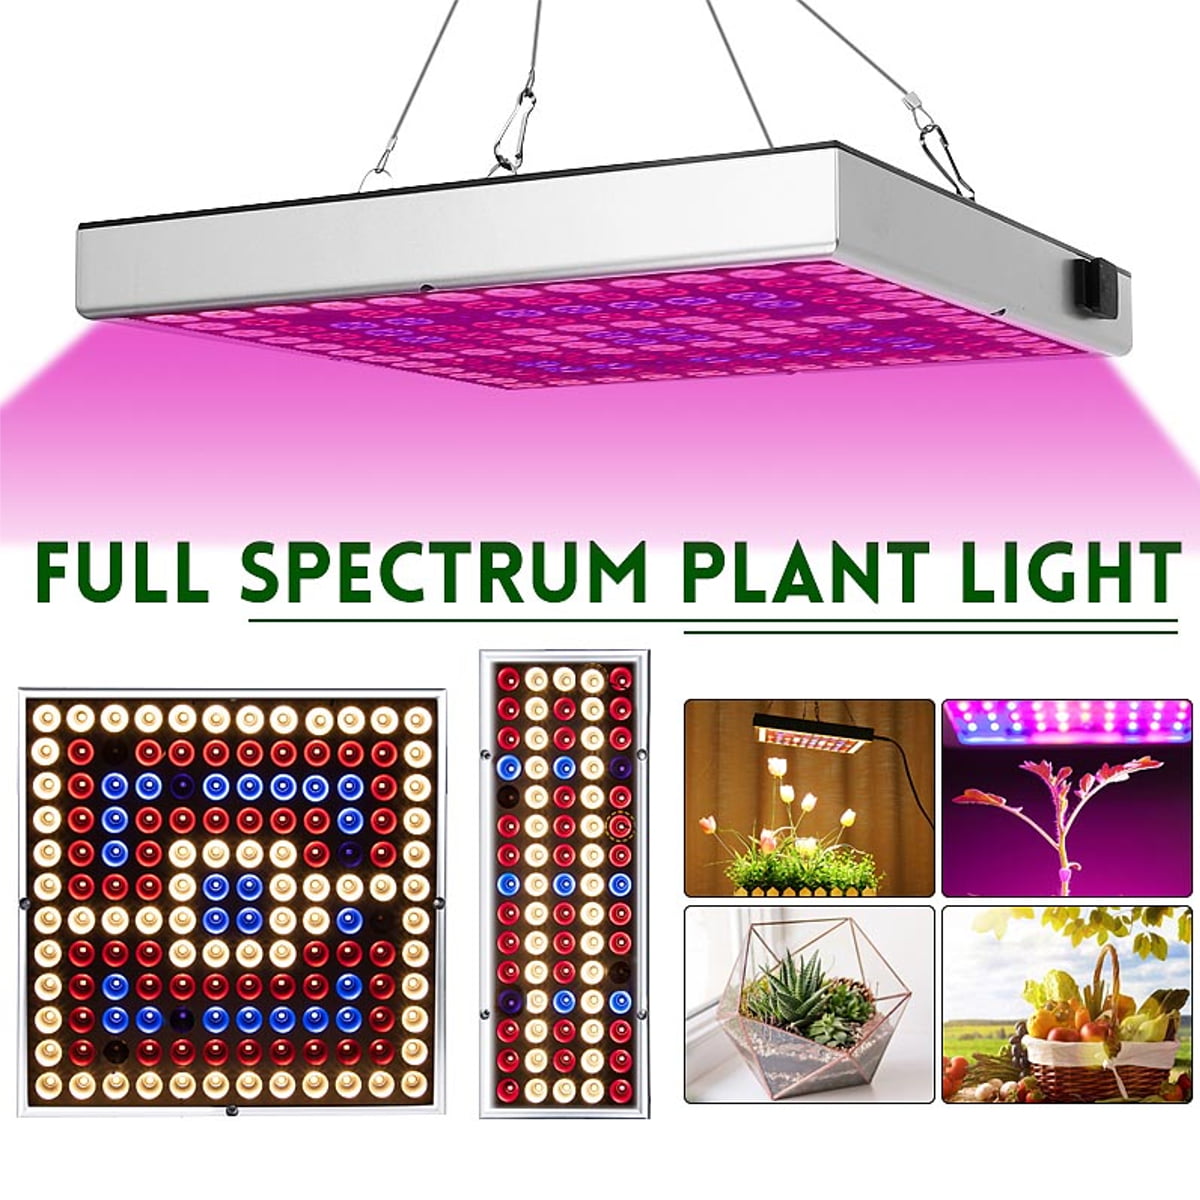 4000W 300LED Grow Light Sunlike for Indoor Plants Full Spectrum Plant Growing US